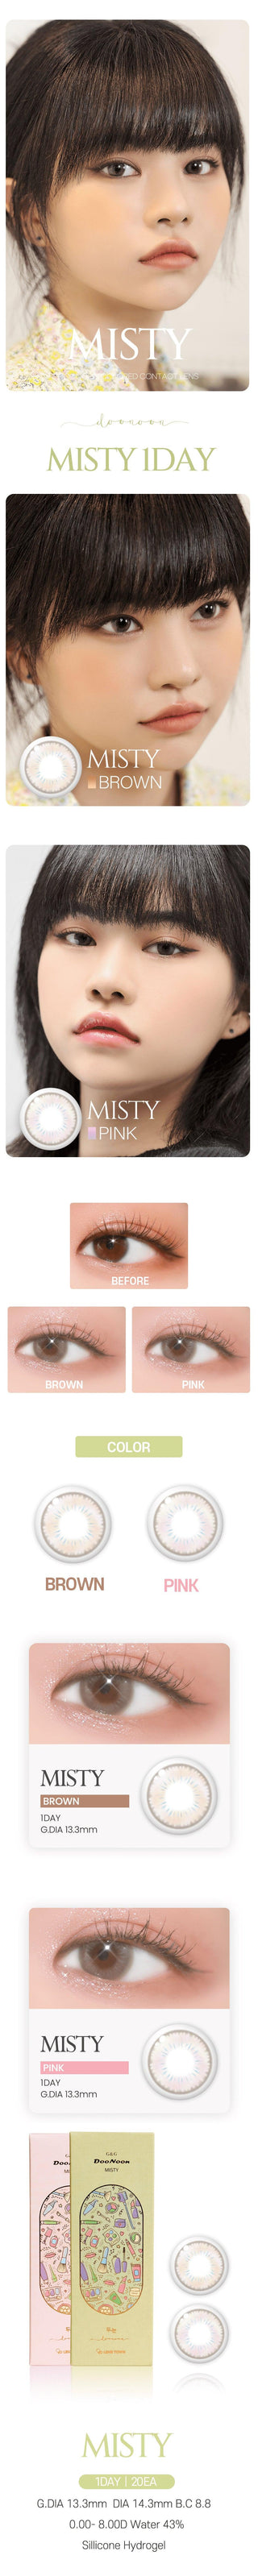 Variety of DooNoon Misty Pink (20pk) contact lens colors displayed, with closeups of an eye wearing the contact lens colors, and with a model wearing the contact lens colors showing realistic eye-enlarging effect from various angles.